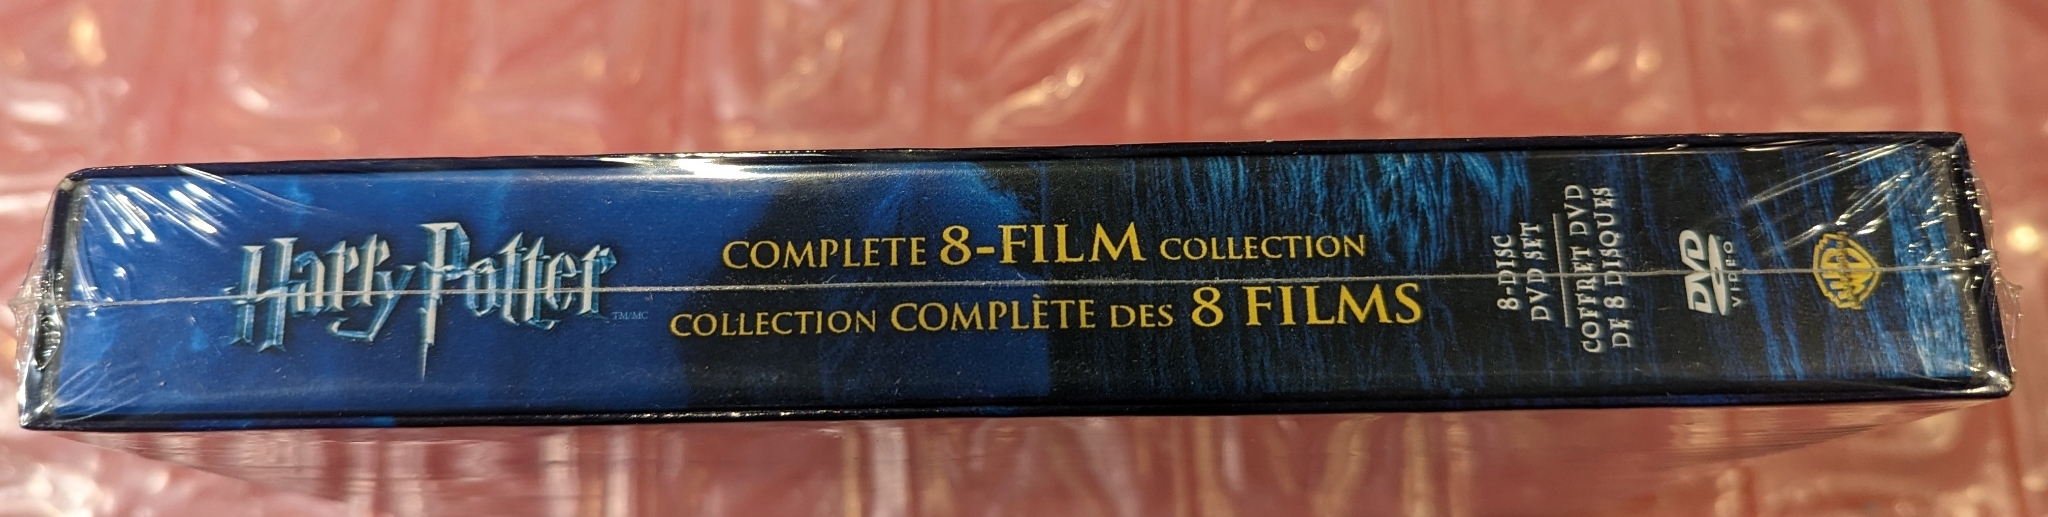 Police Auctions Canada - Harry Potter: The Complete 8 Film DVD